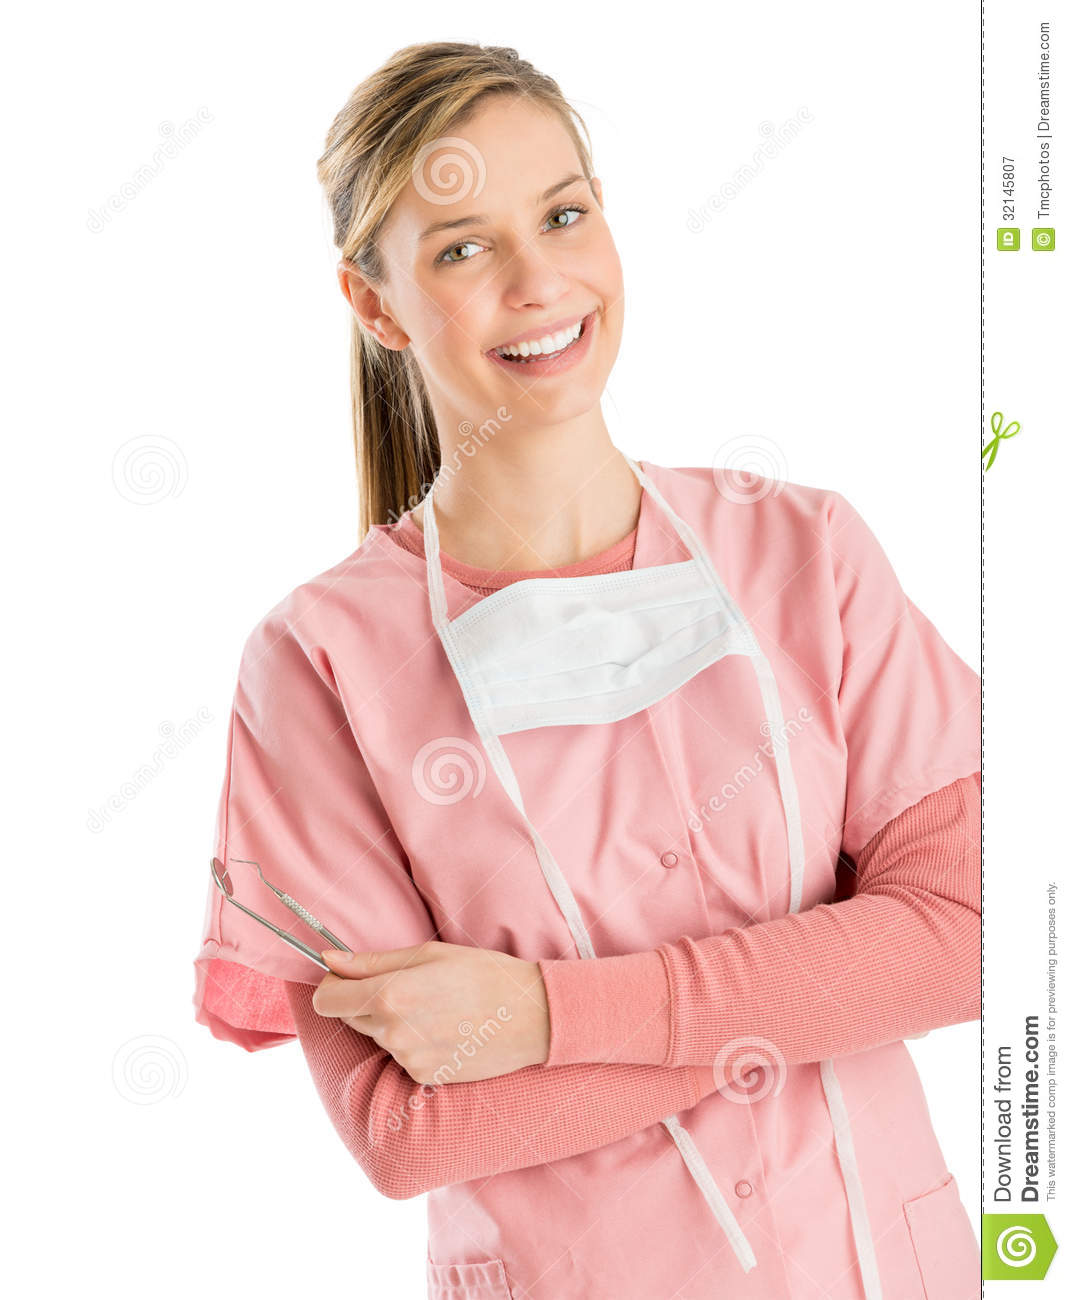 Portrait Of Young Female Dentist With Dental Equipments Standing Arms